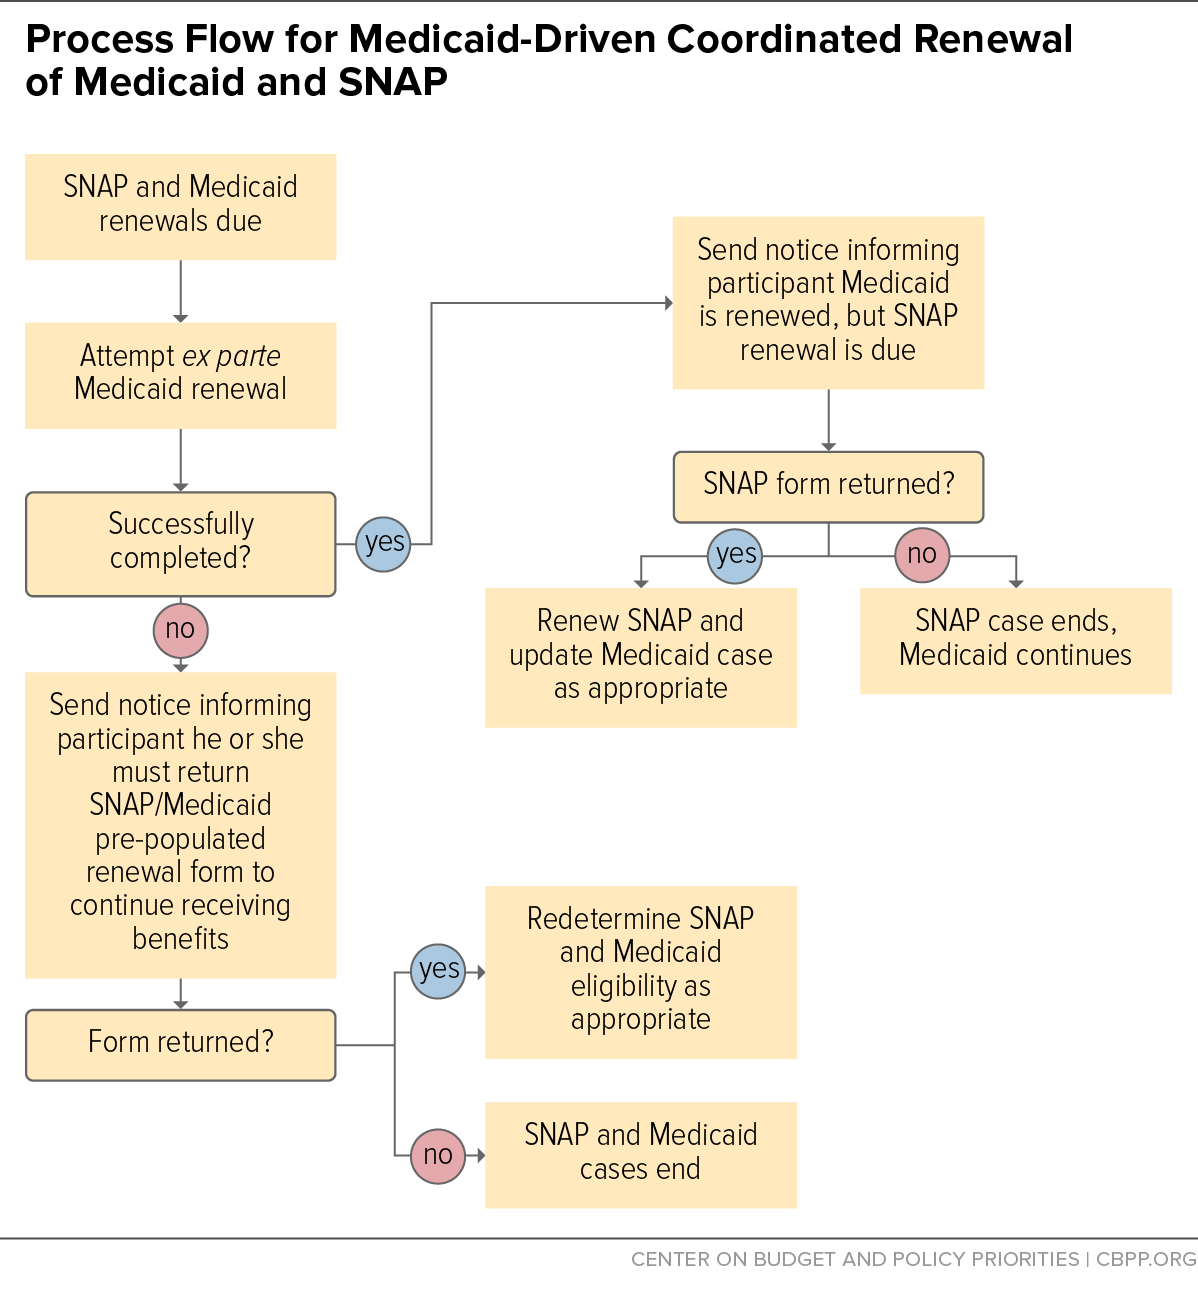 Process Flow for Medicaid-Driven Coordinated Renewal of Medicaid and SNAP